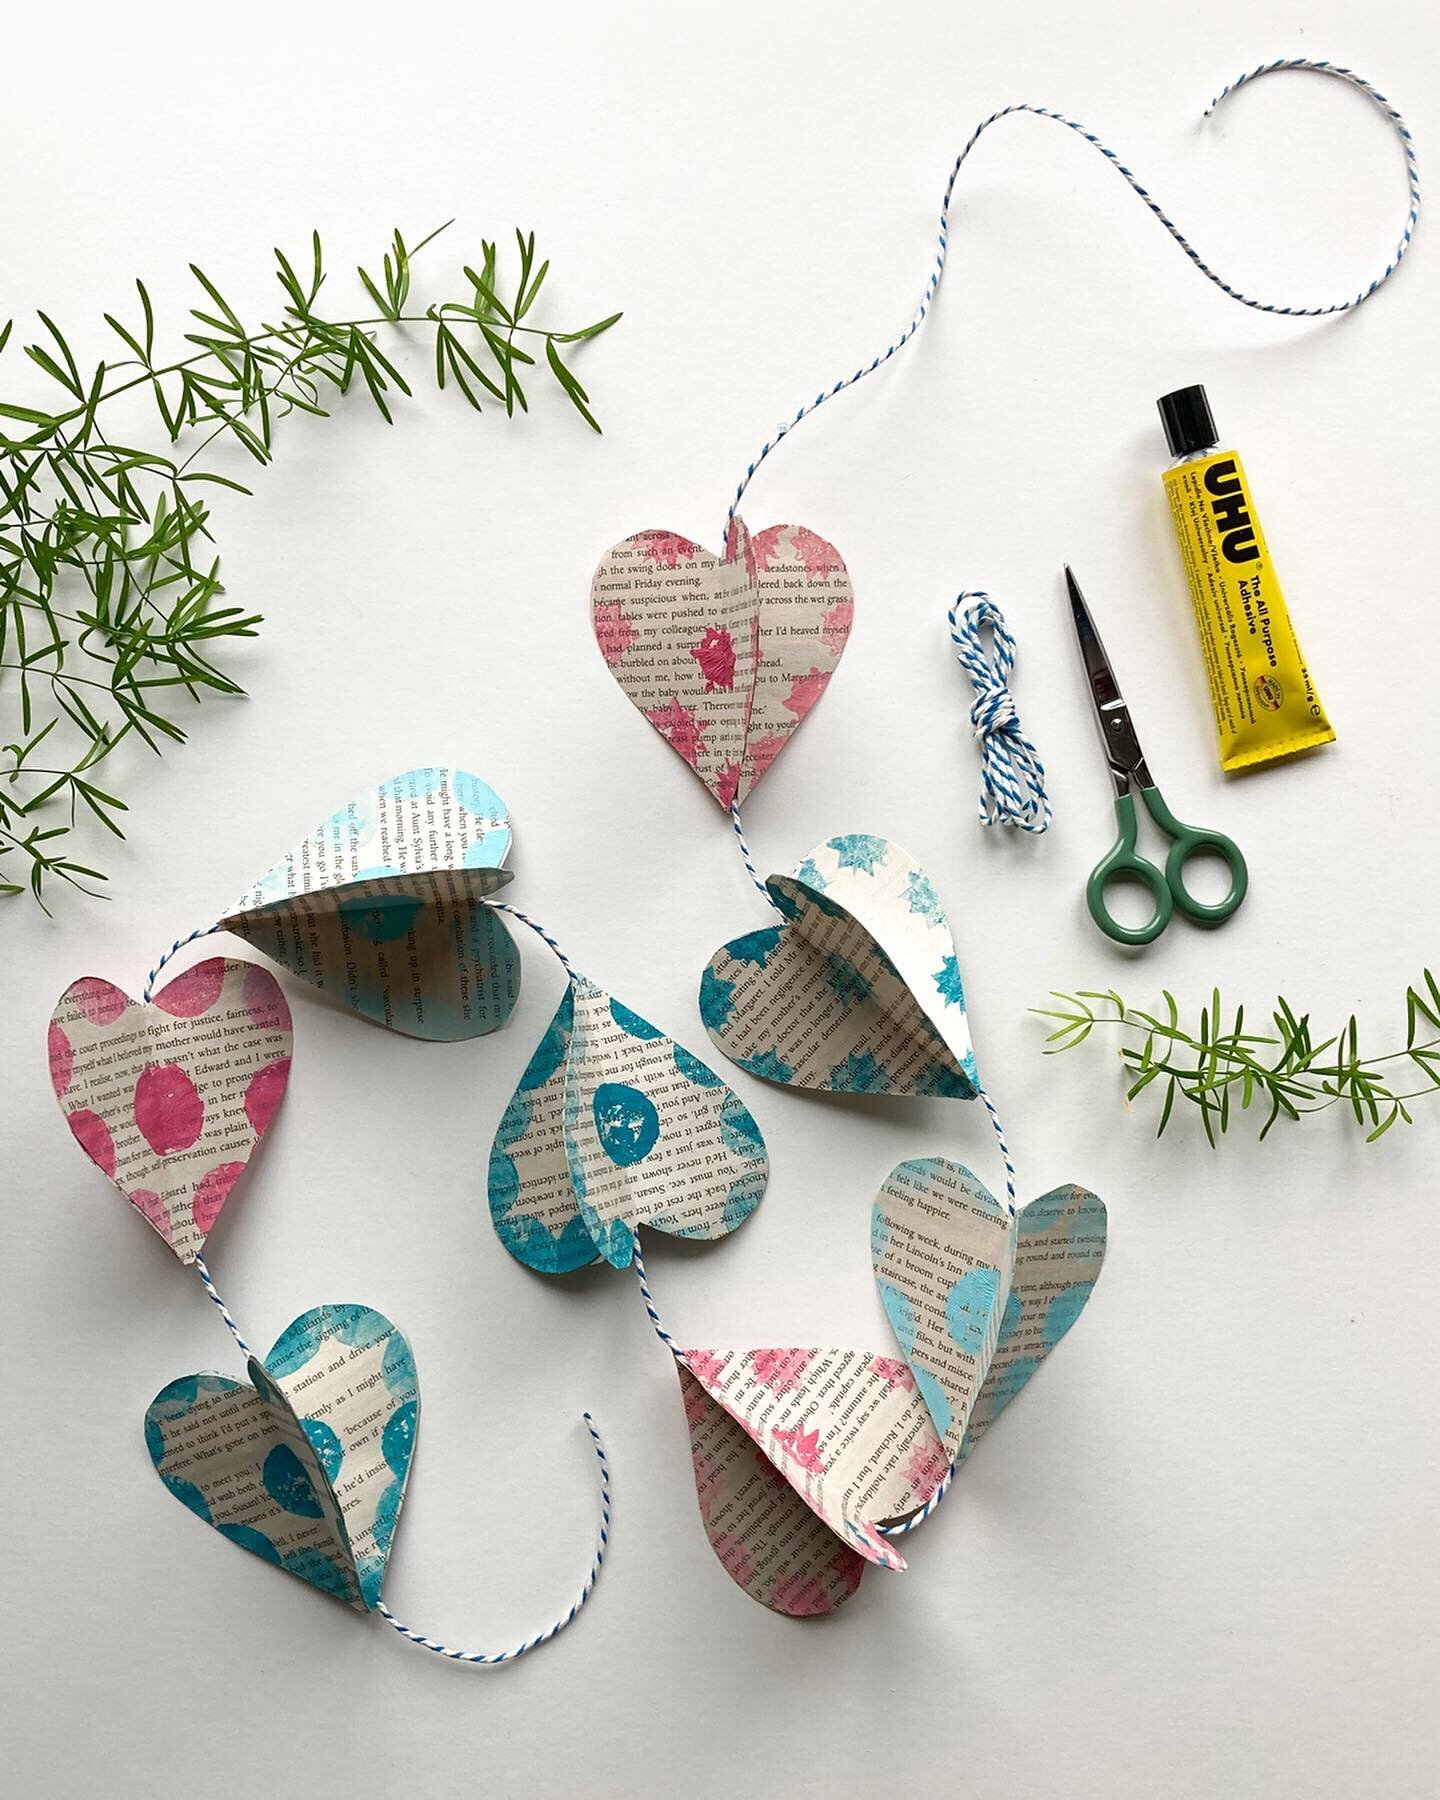 If you're in the mood for a little Valentine crafting tonight you can download a template and instructions for this lovely paper heart garland from the FREE STUFF page of my website (link in bio). All you need is an old book, glue, scissors and a bit